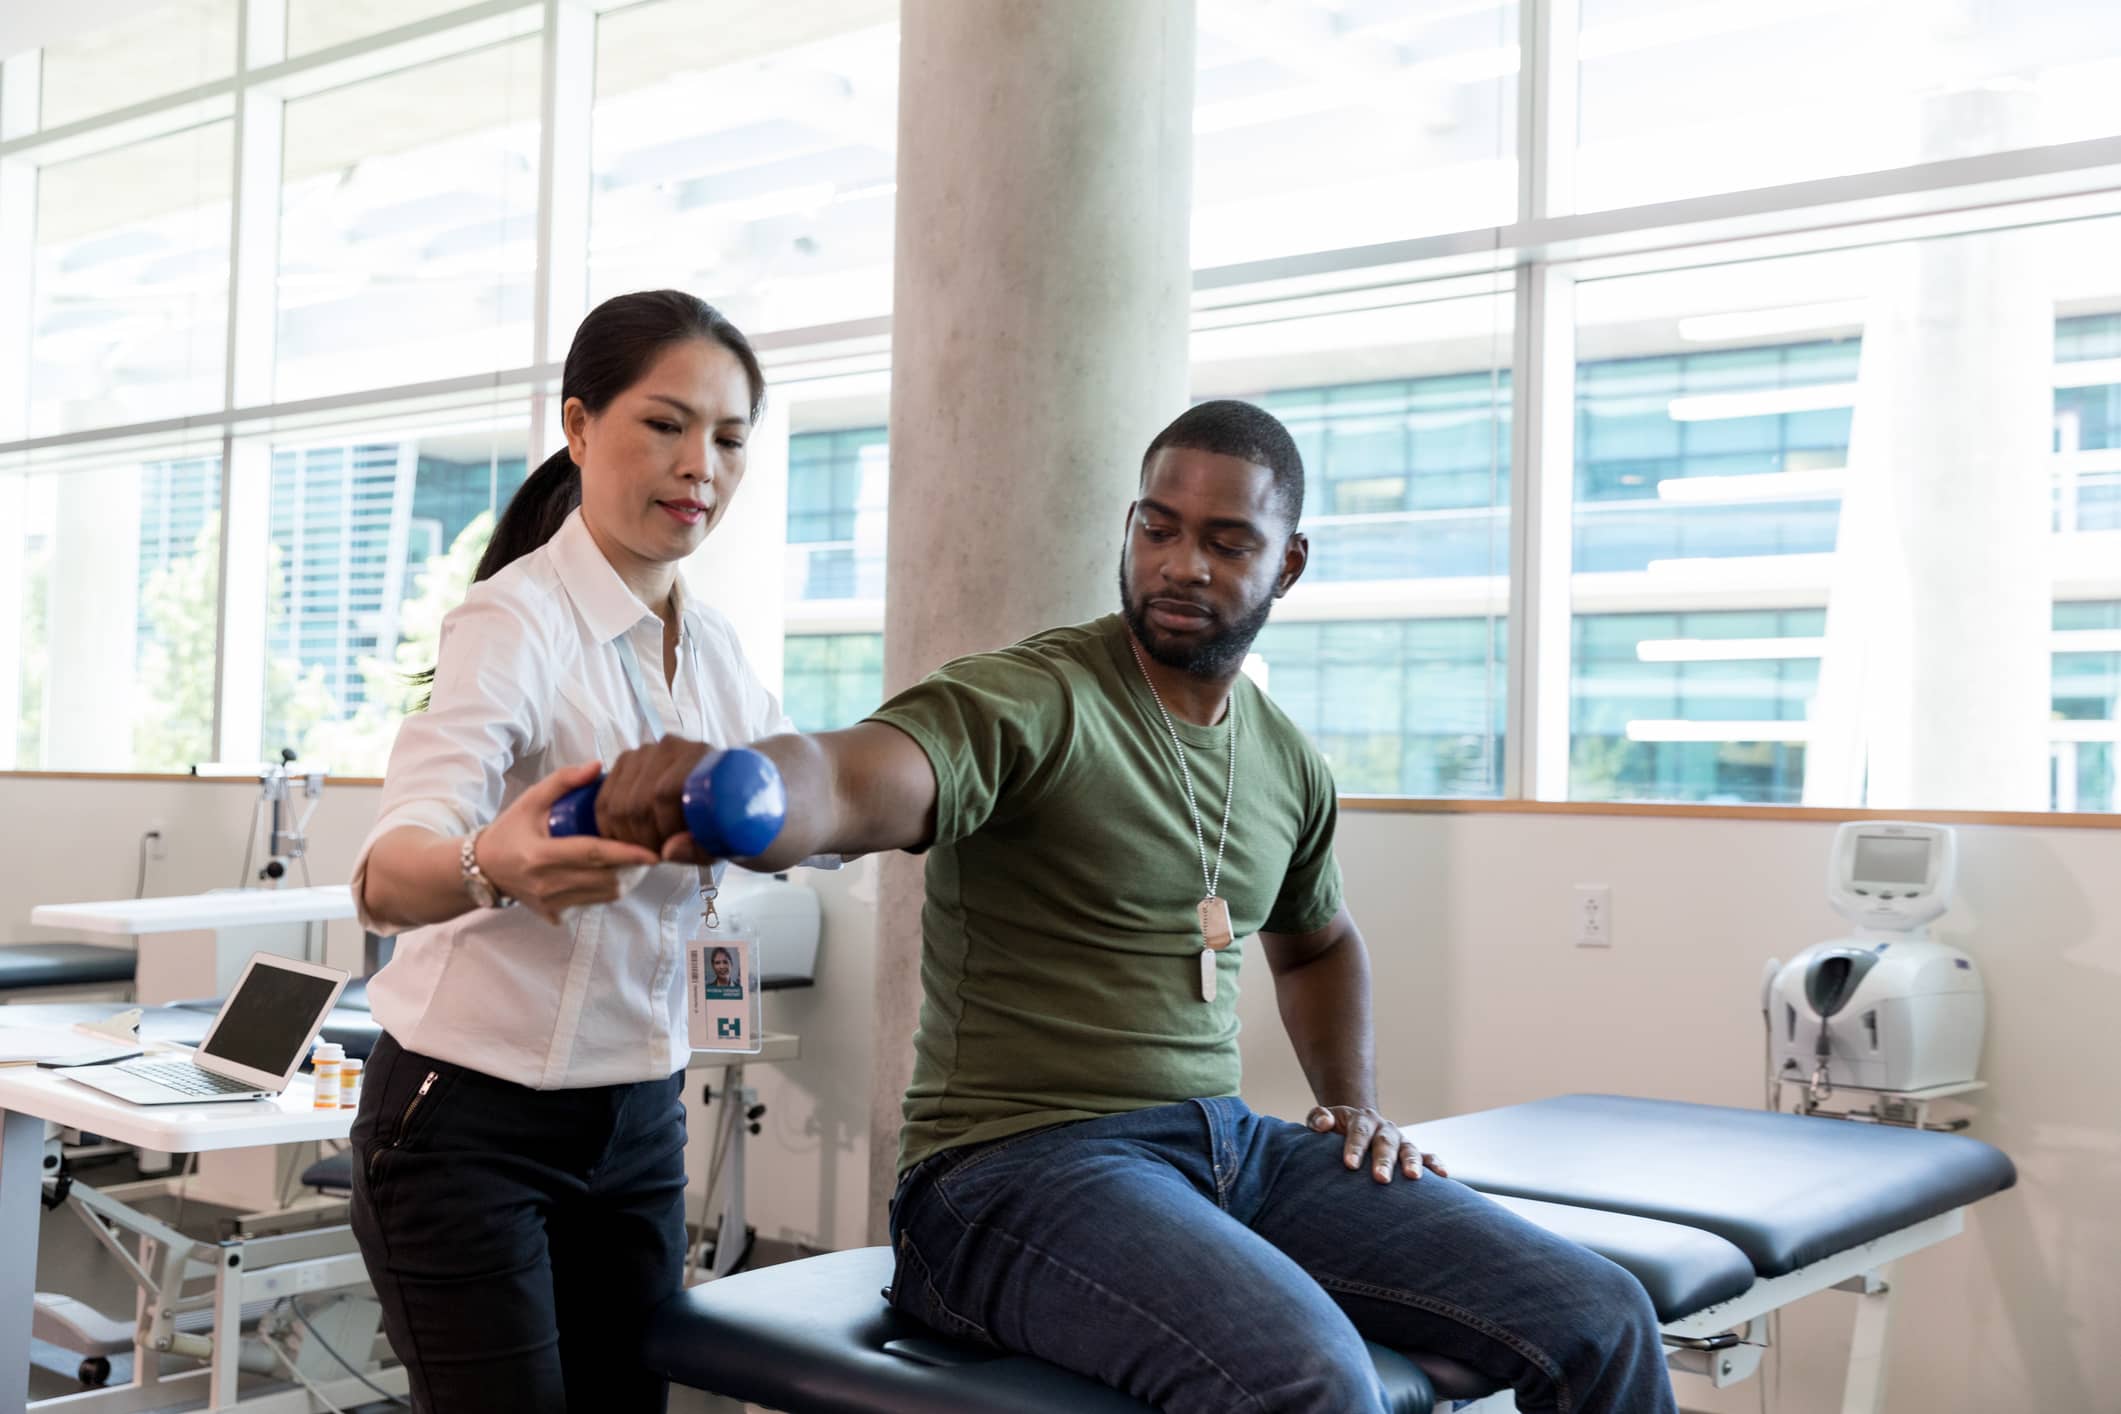 Travel physical therapist assisting a patient with shoulder exercises